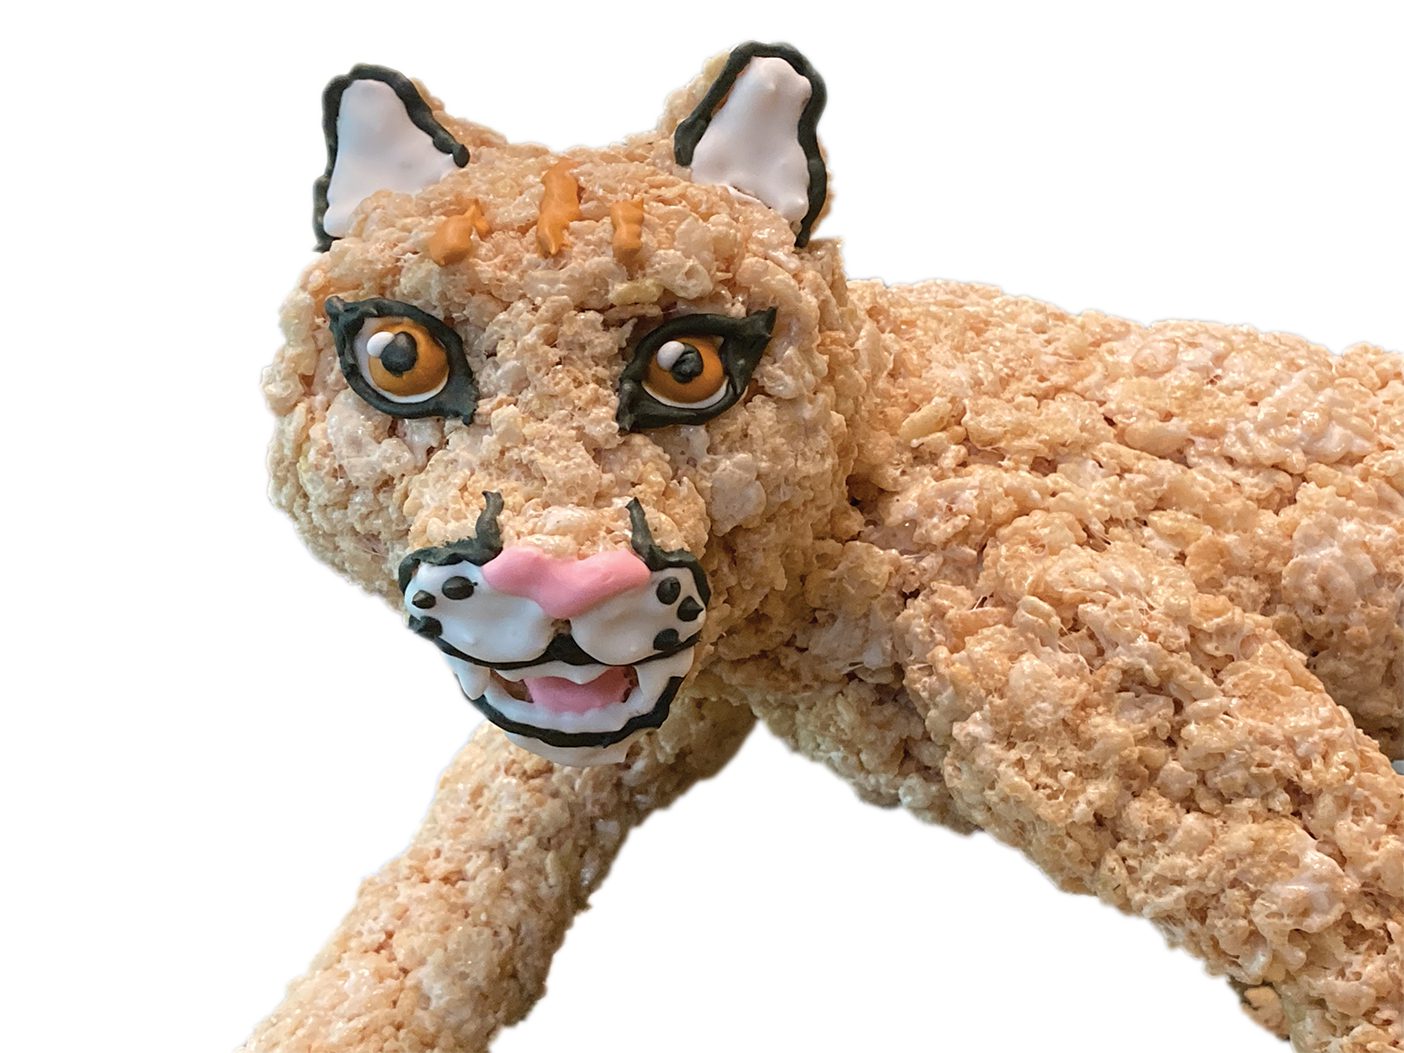 A cougar that has been made from rice crispy treats.